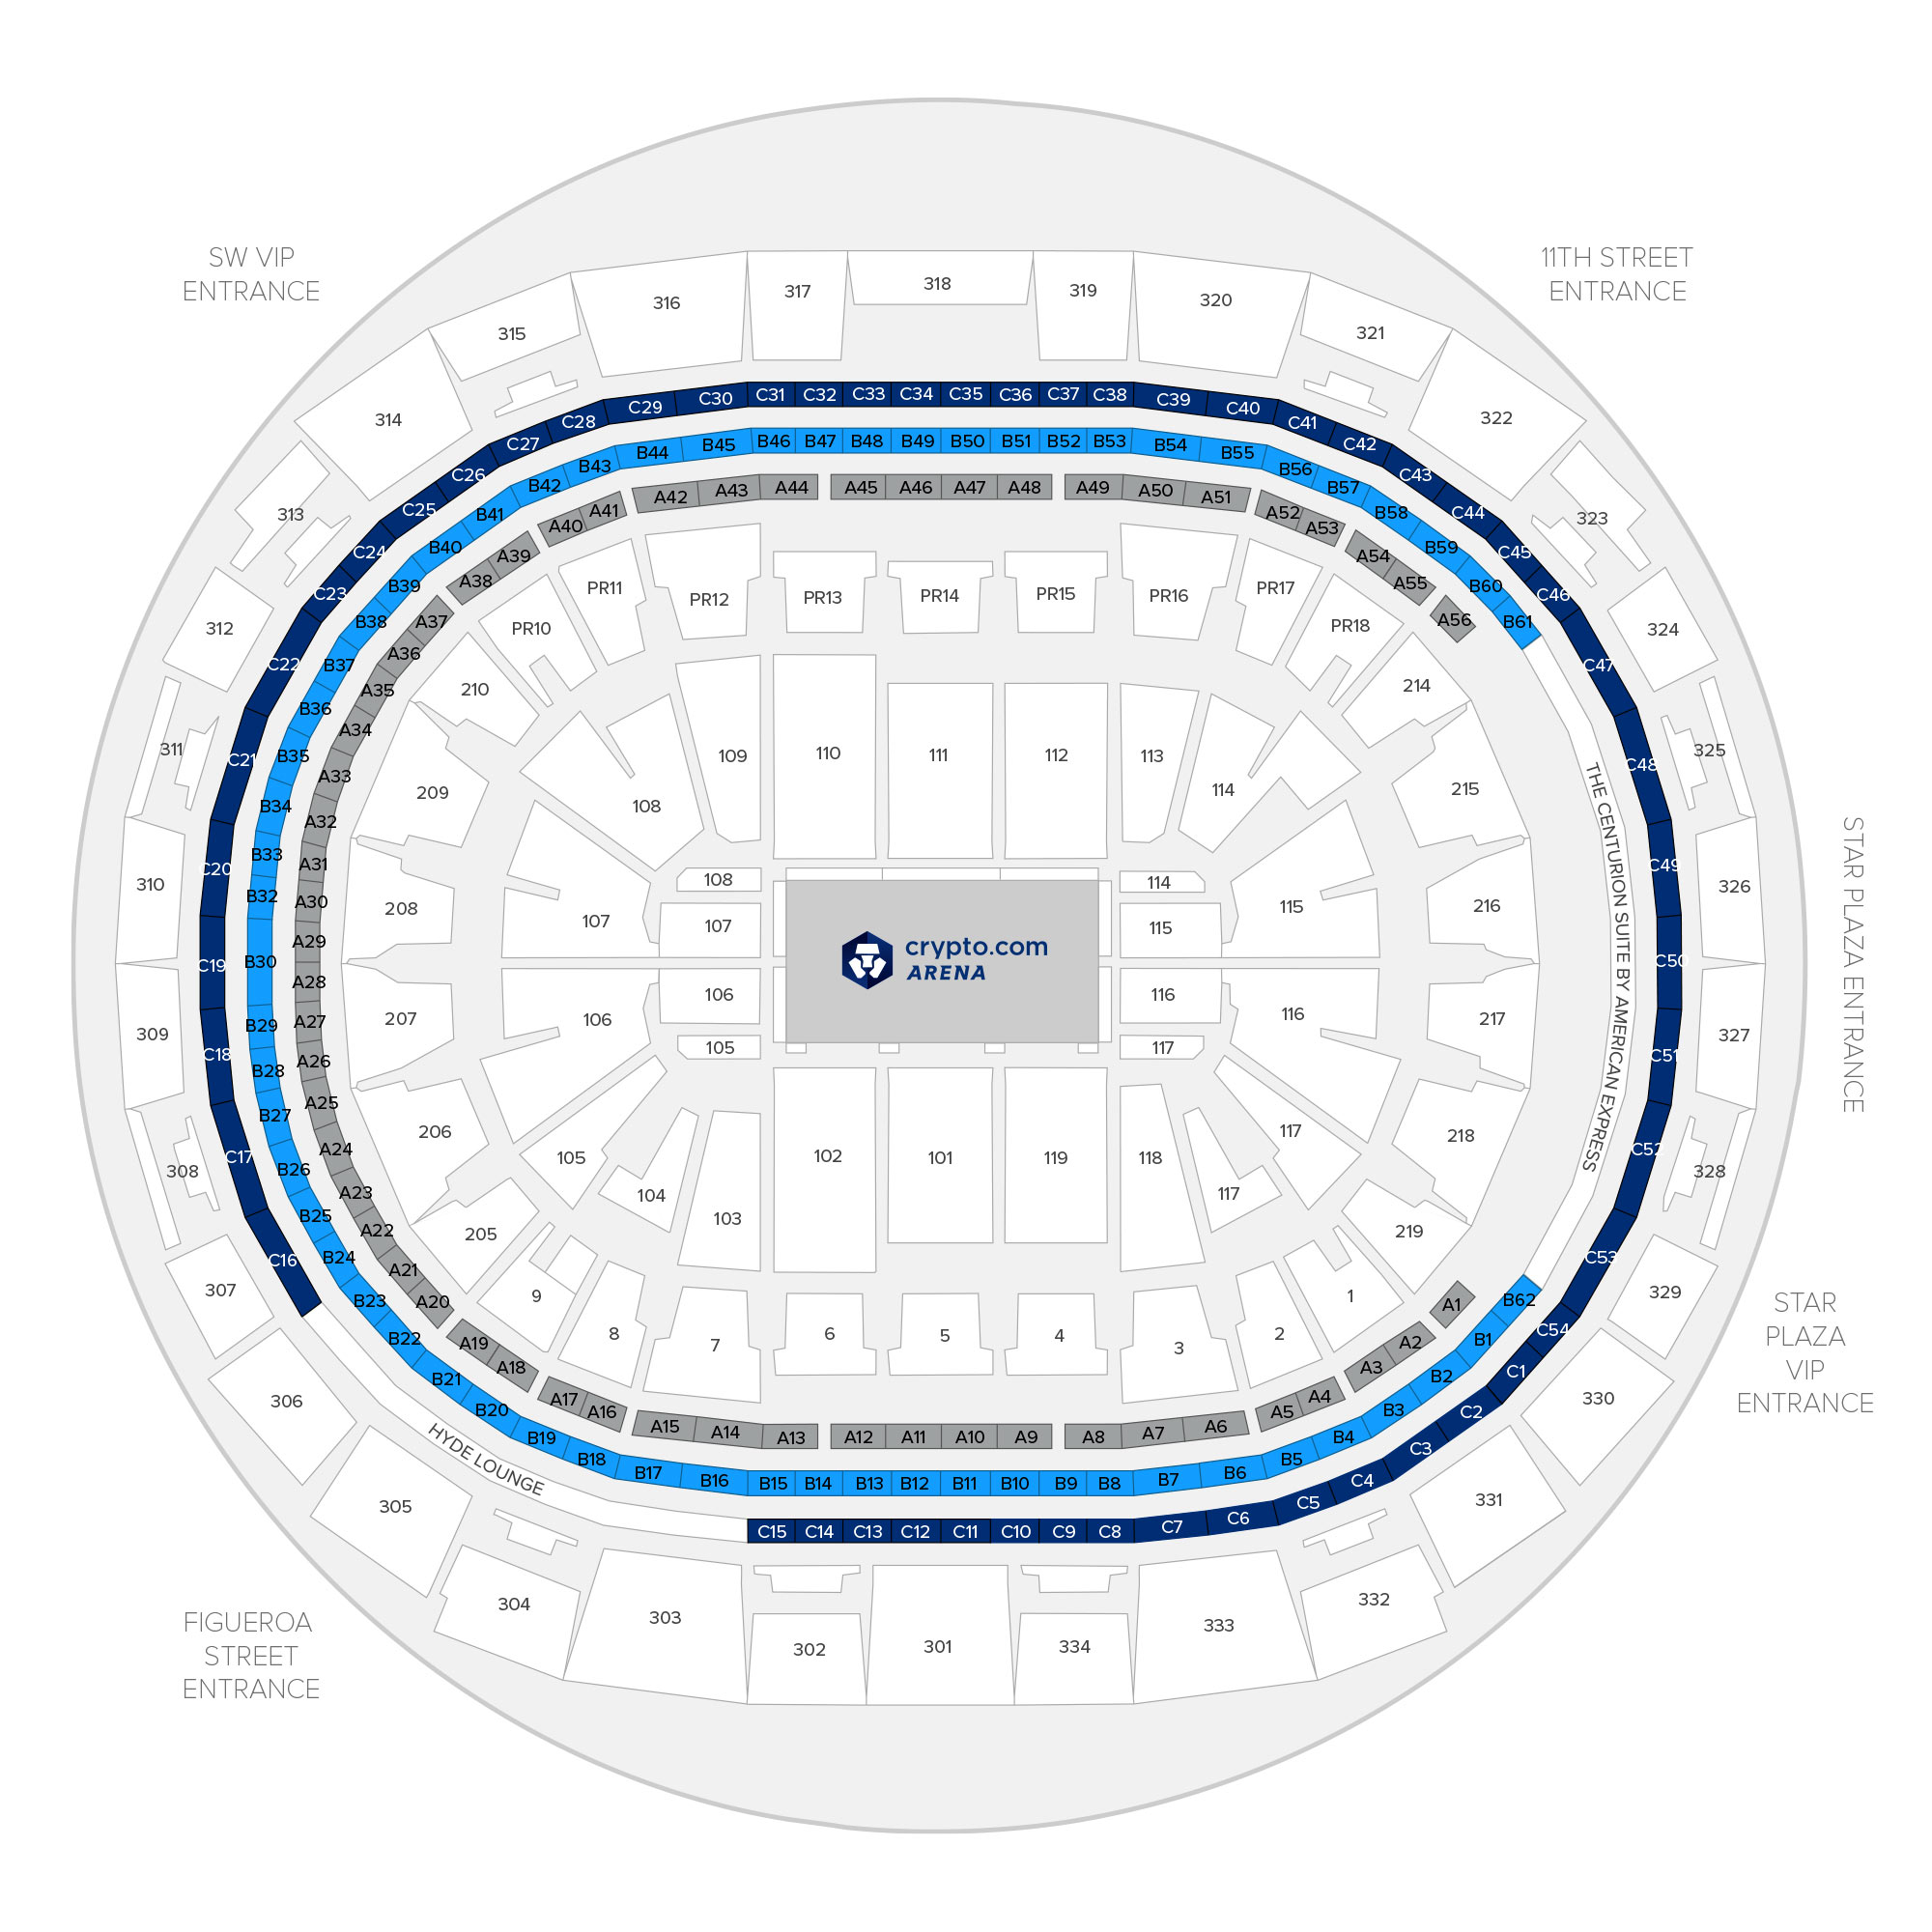 Crypto.com Arena (Formerly Staples Center) /  Suite Map and Seating Chart